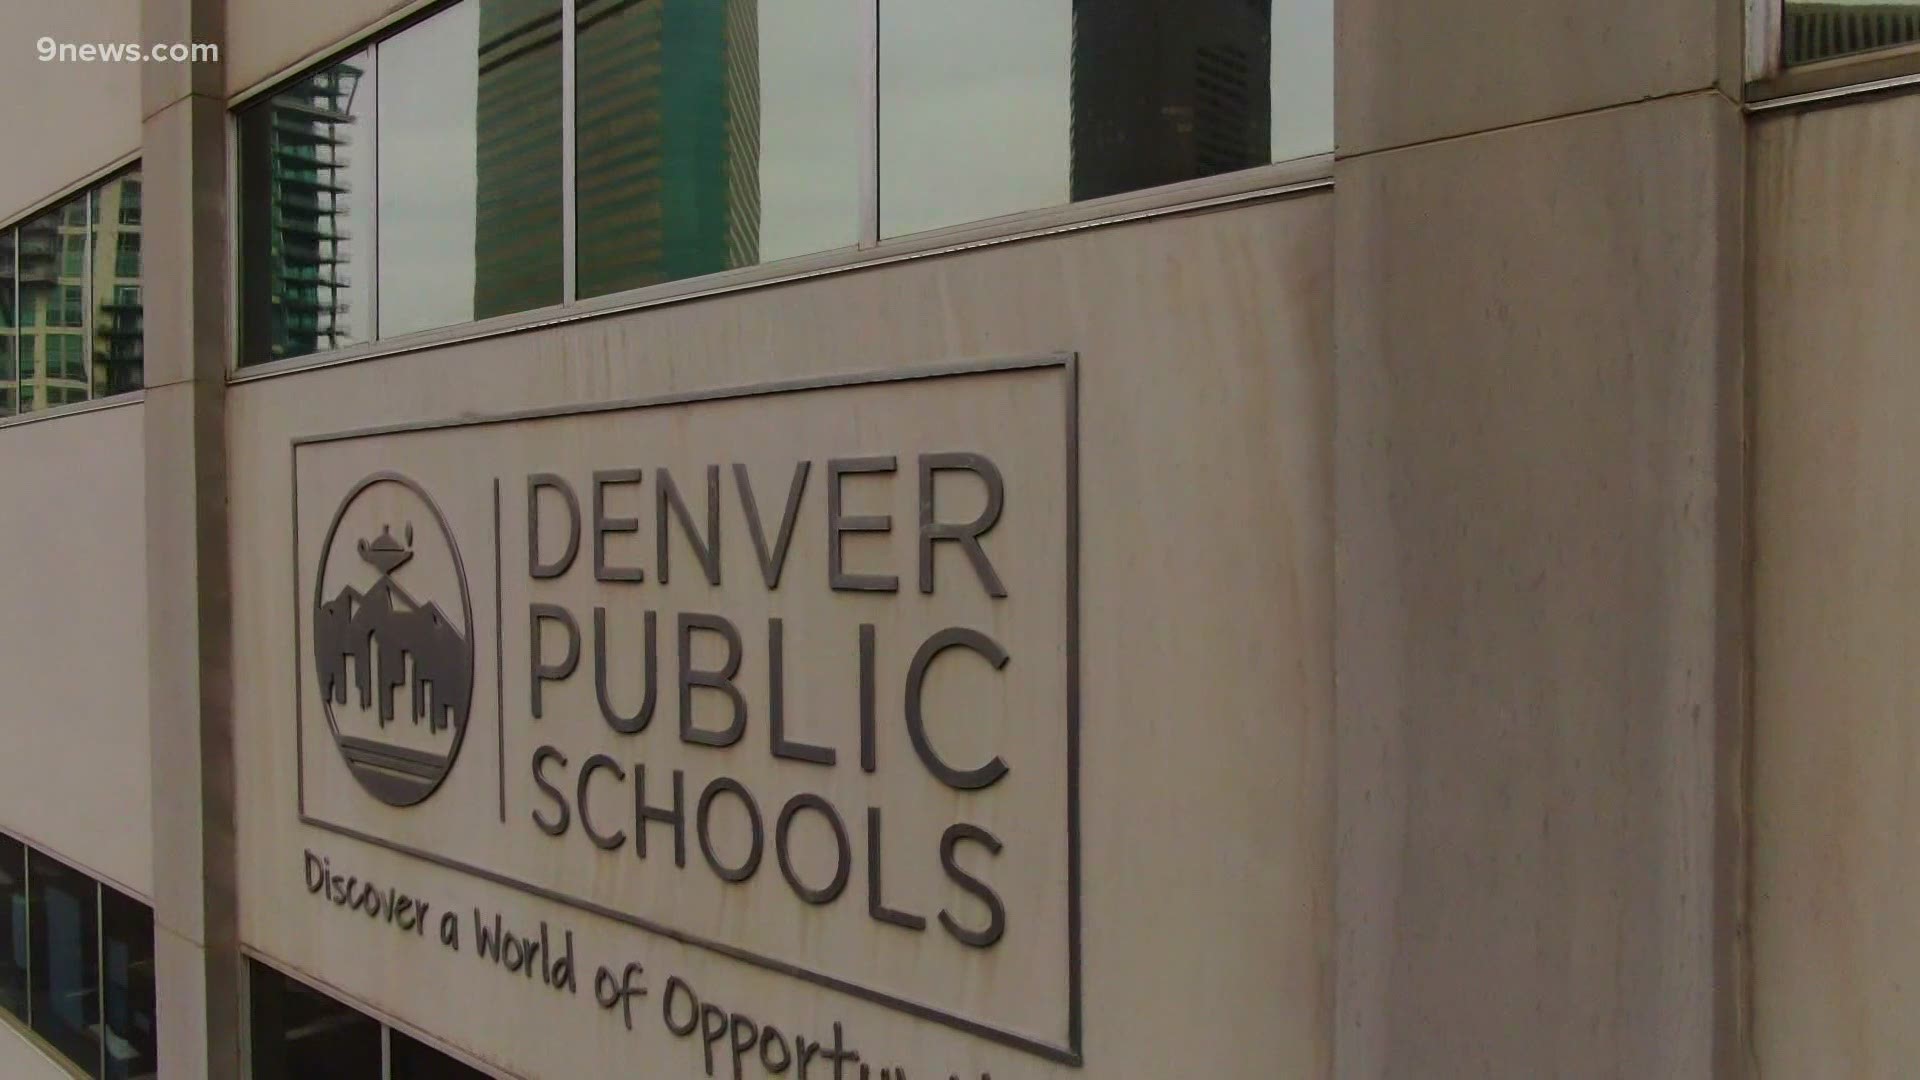 Dr. Alex Marrero was picked by the school district to be the next head of Denver Public Schools. Some in the community had expressed concerns over the choice.